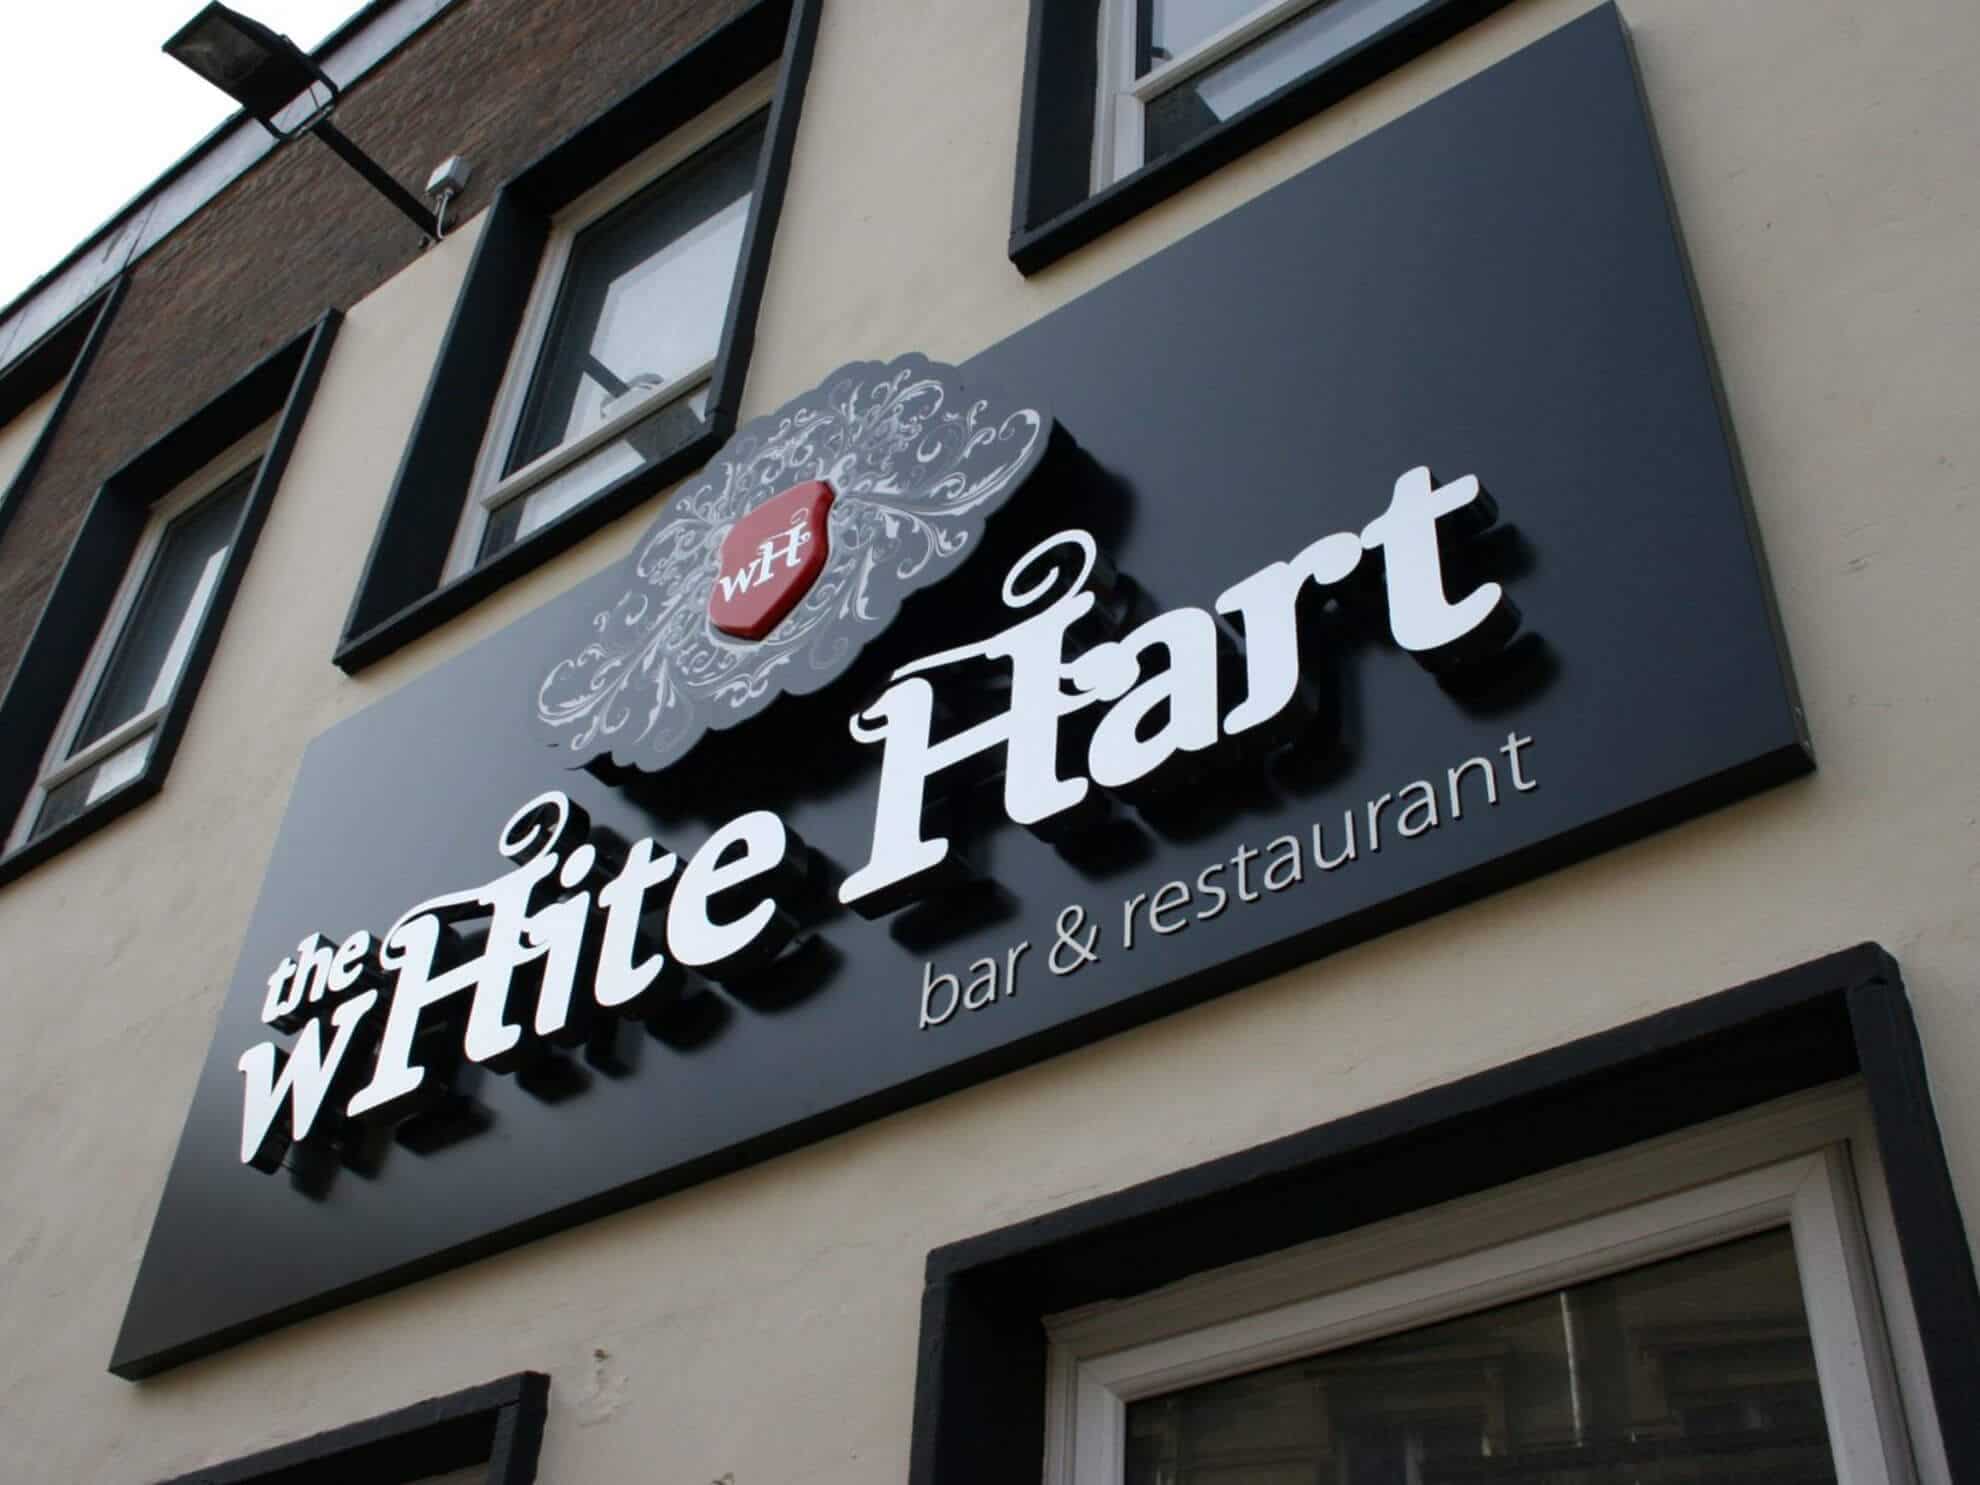 the wHite Hart sign - 3D built up poly stainless steel letters with white LED halo illumination and feature logo